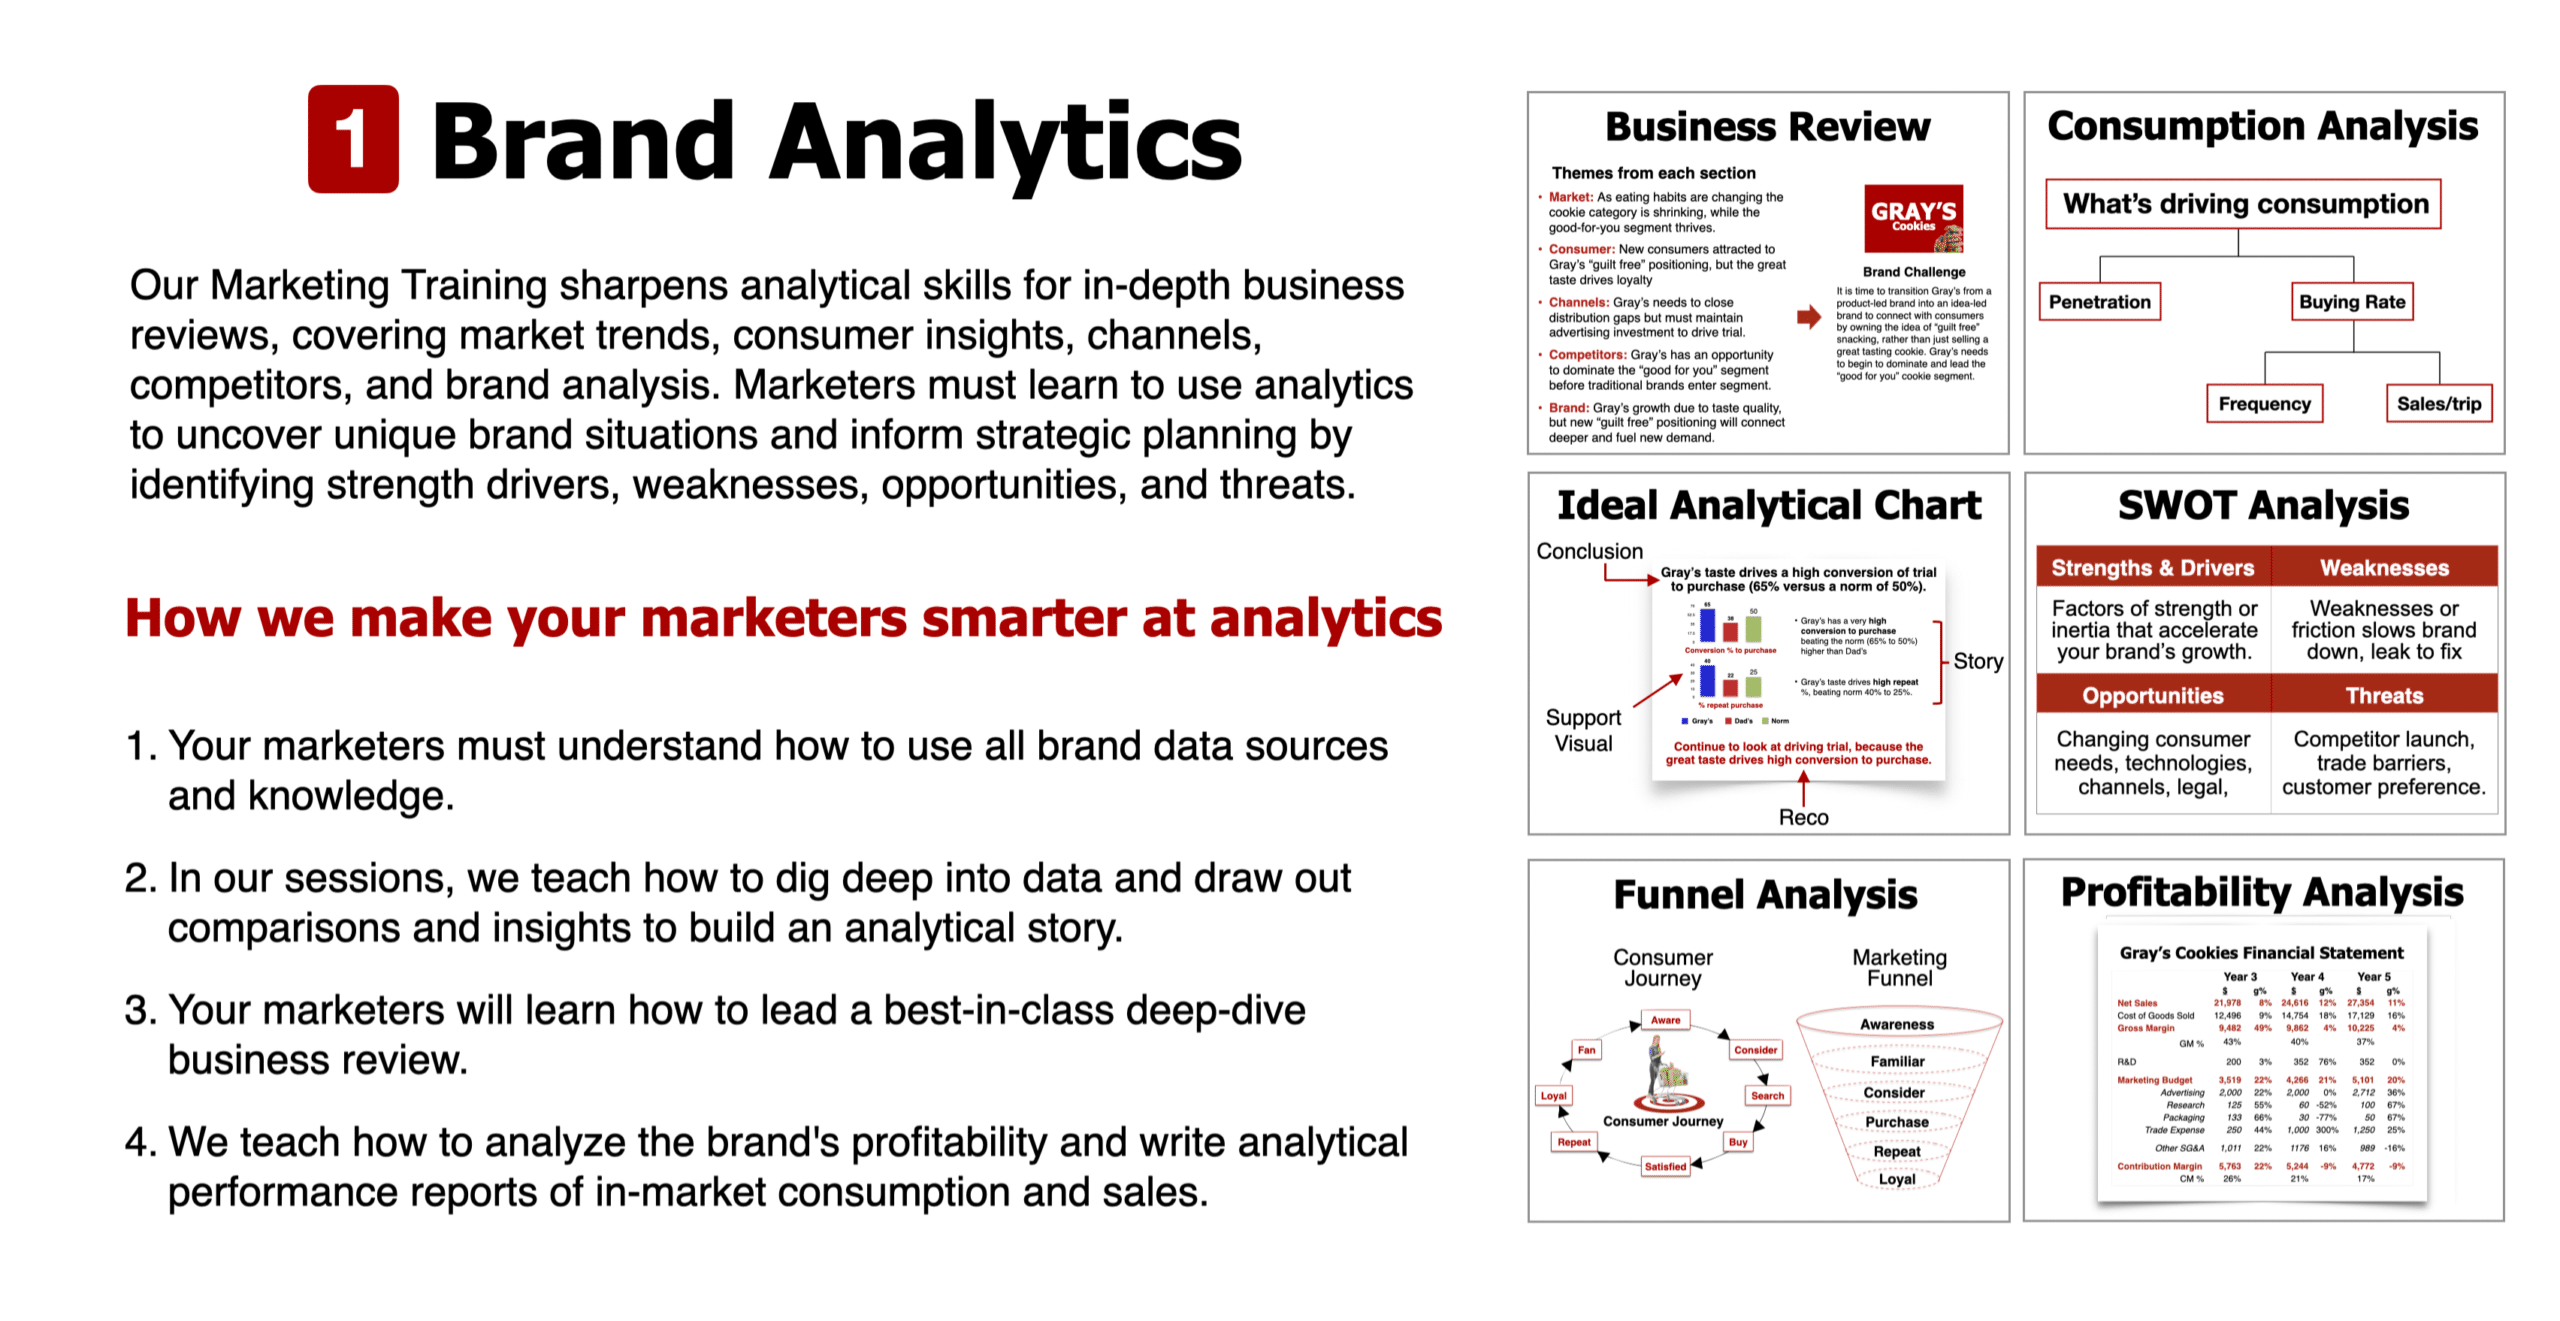 Brand Analytics Training used in our Brand Management Training